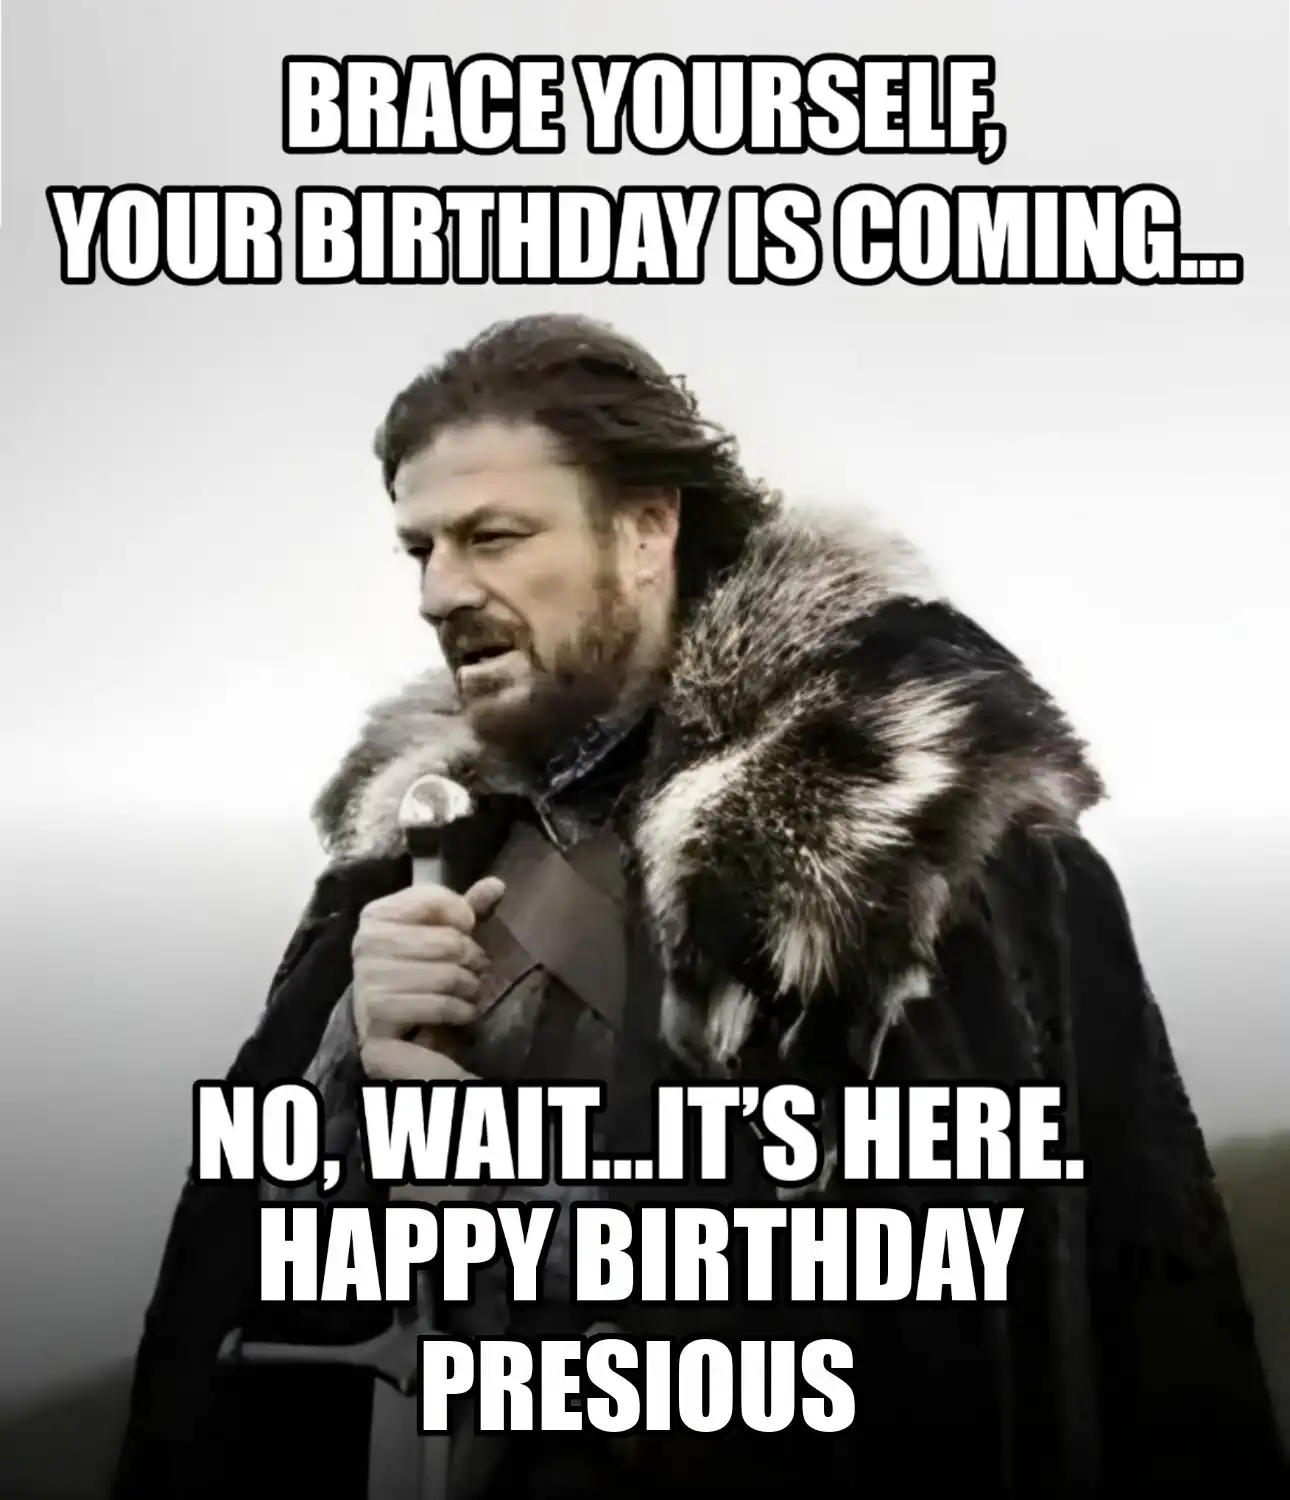 Happy Birthday Presious Brace Yourself Your Birthday Is Coming Meme